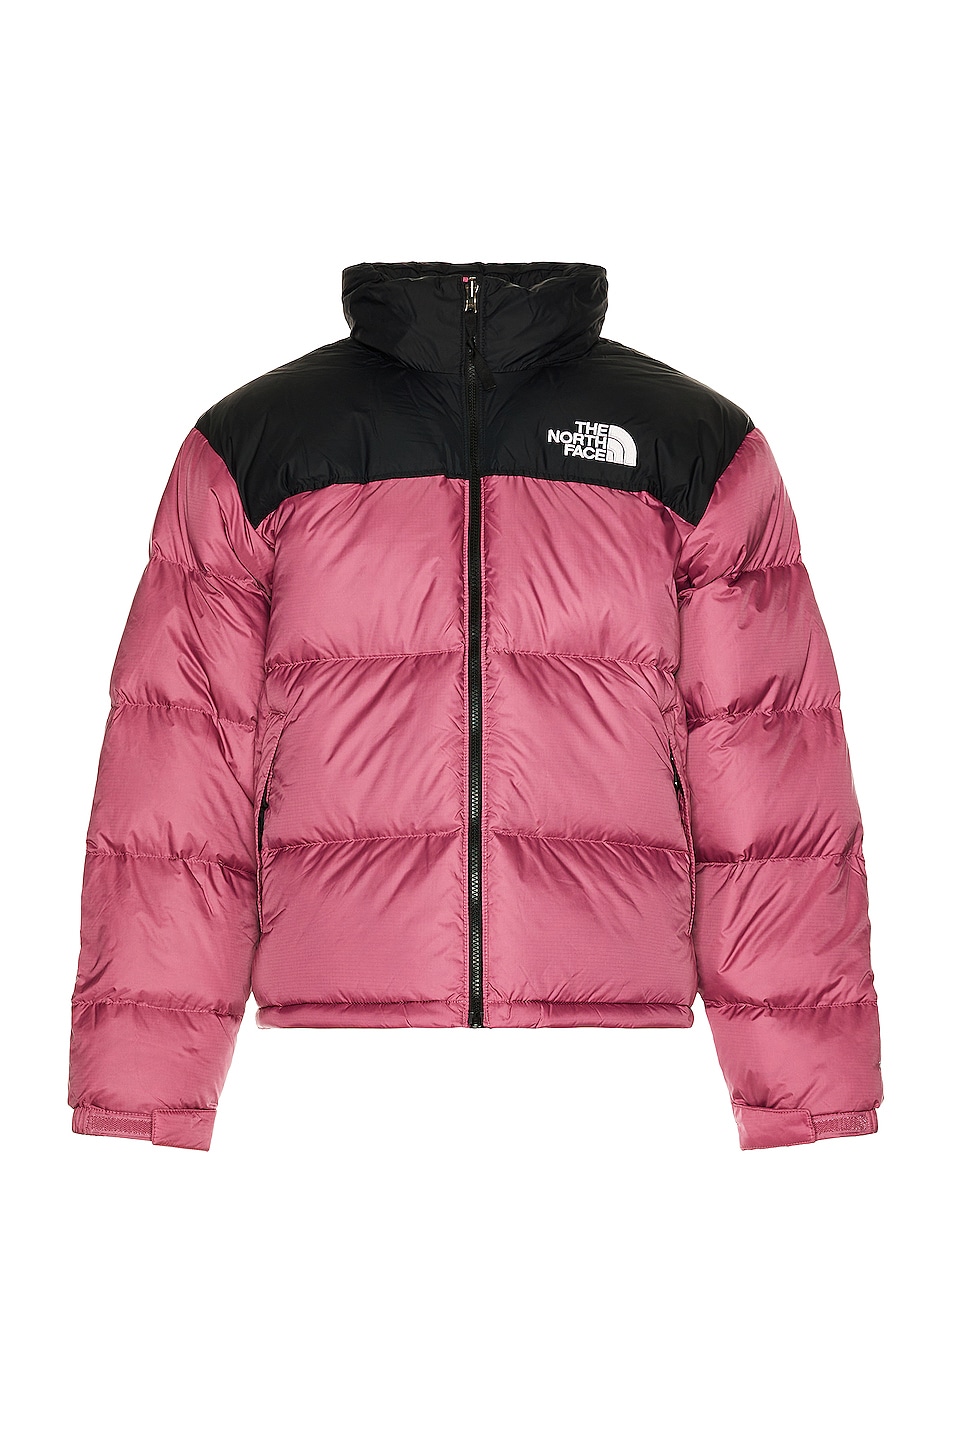 Image 1 of The North Face 1996 Retro Nuptse Jacket in Red Violet